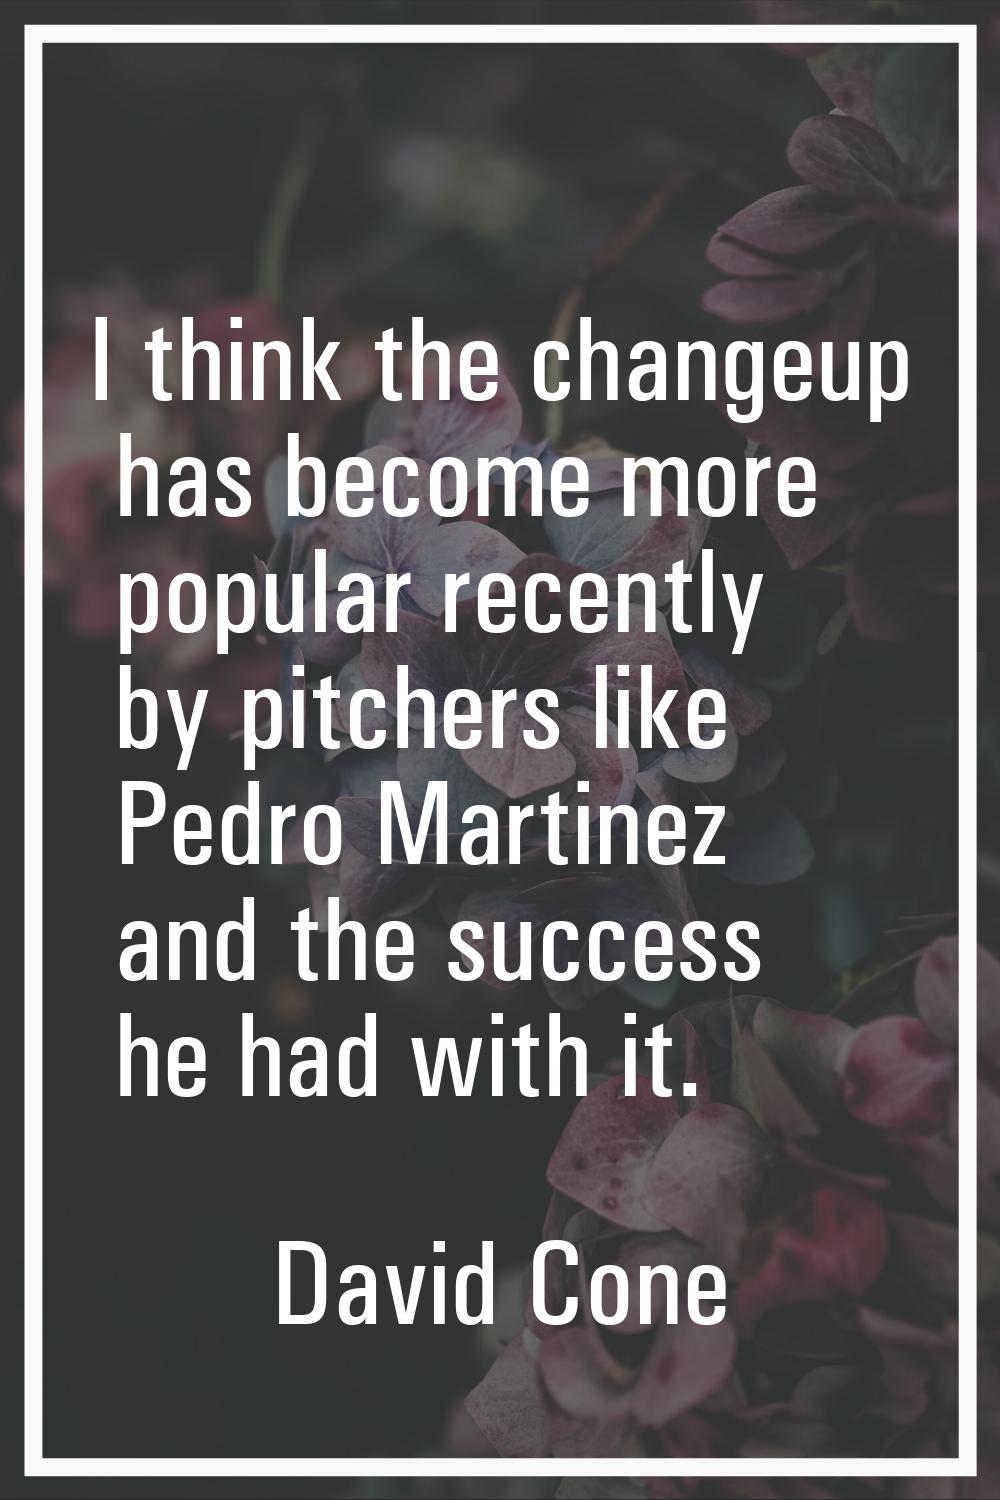 I think the changeup has become more popular recently by pitchers like Pedro Martinez and the succe